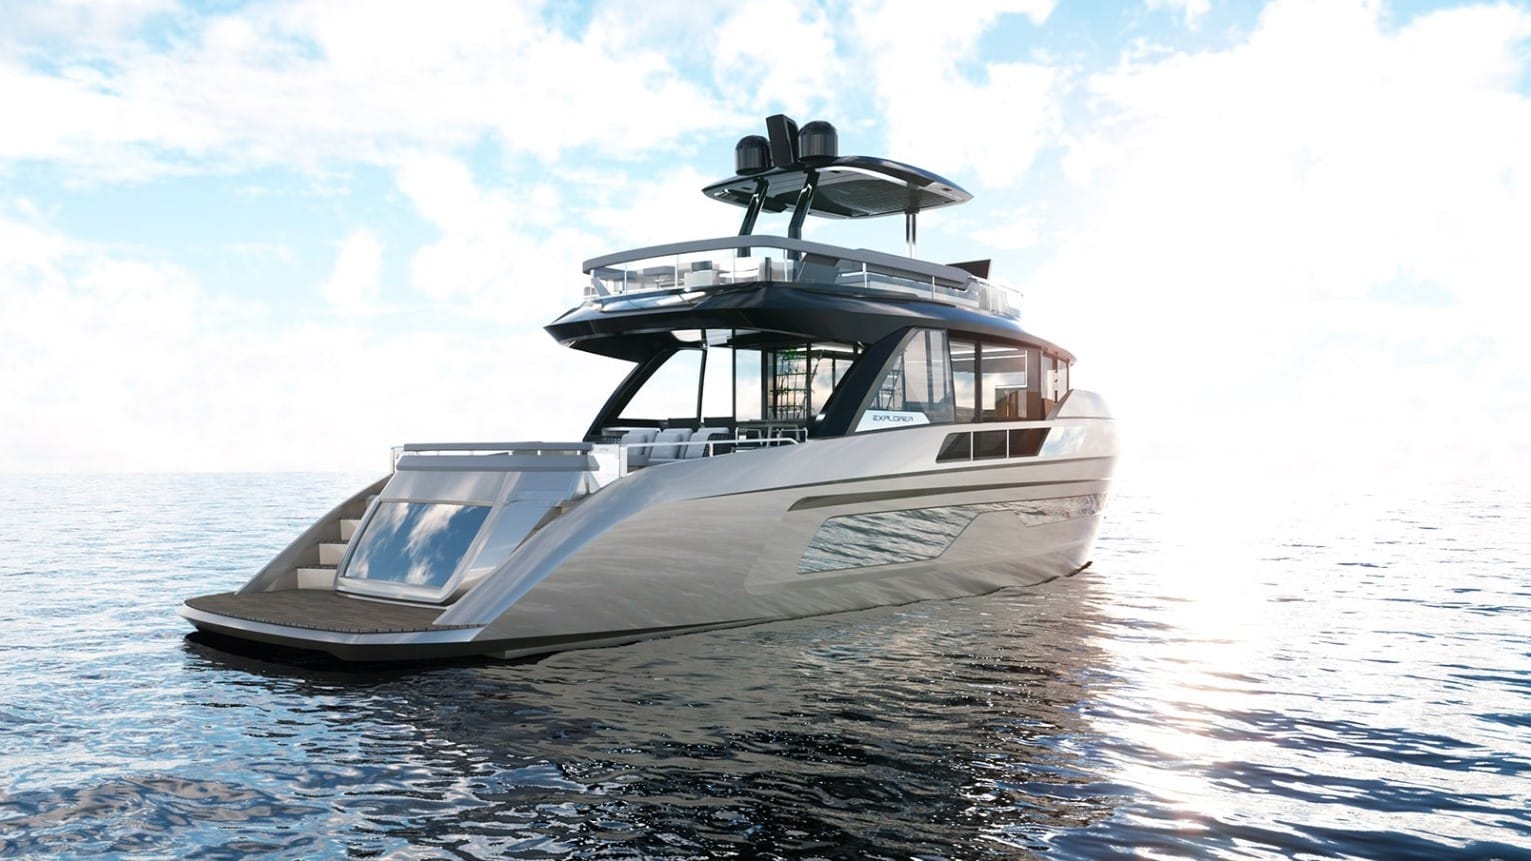 Explorer 62, the perfection of a design yacht that has revolutionized yachting